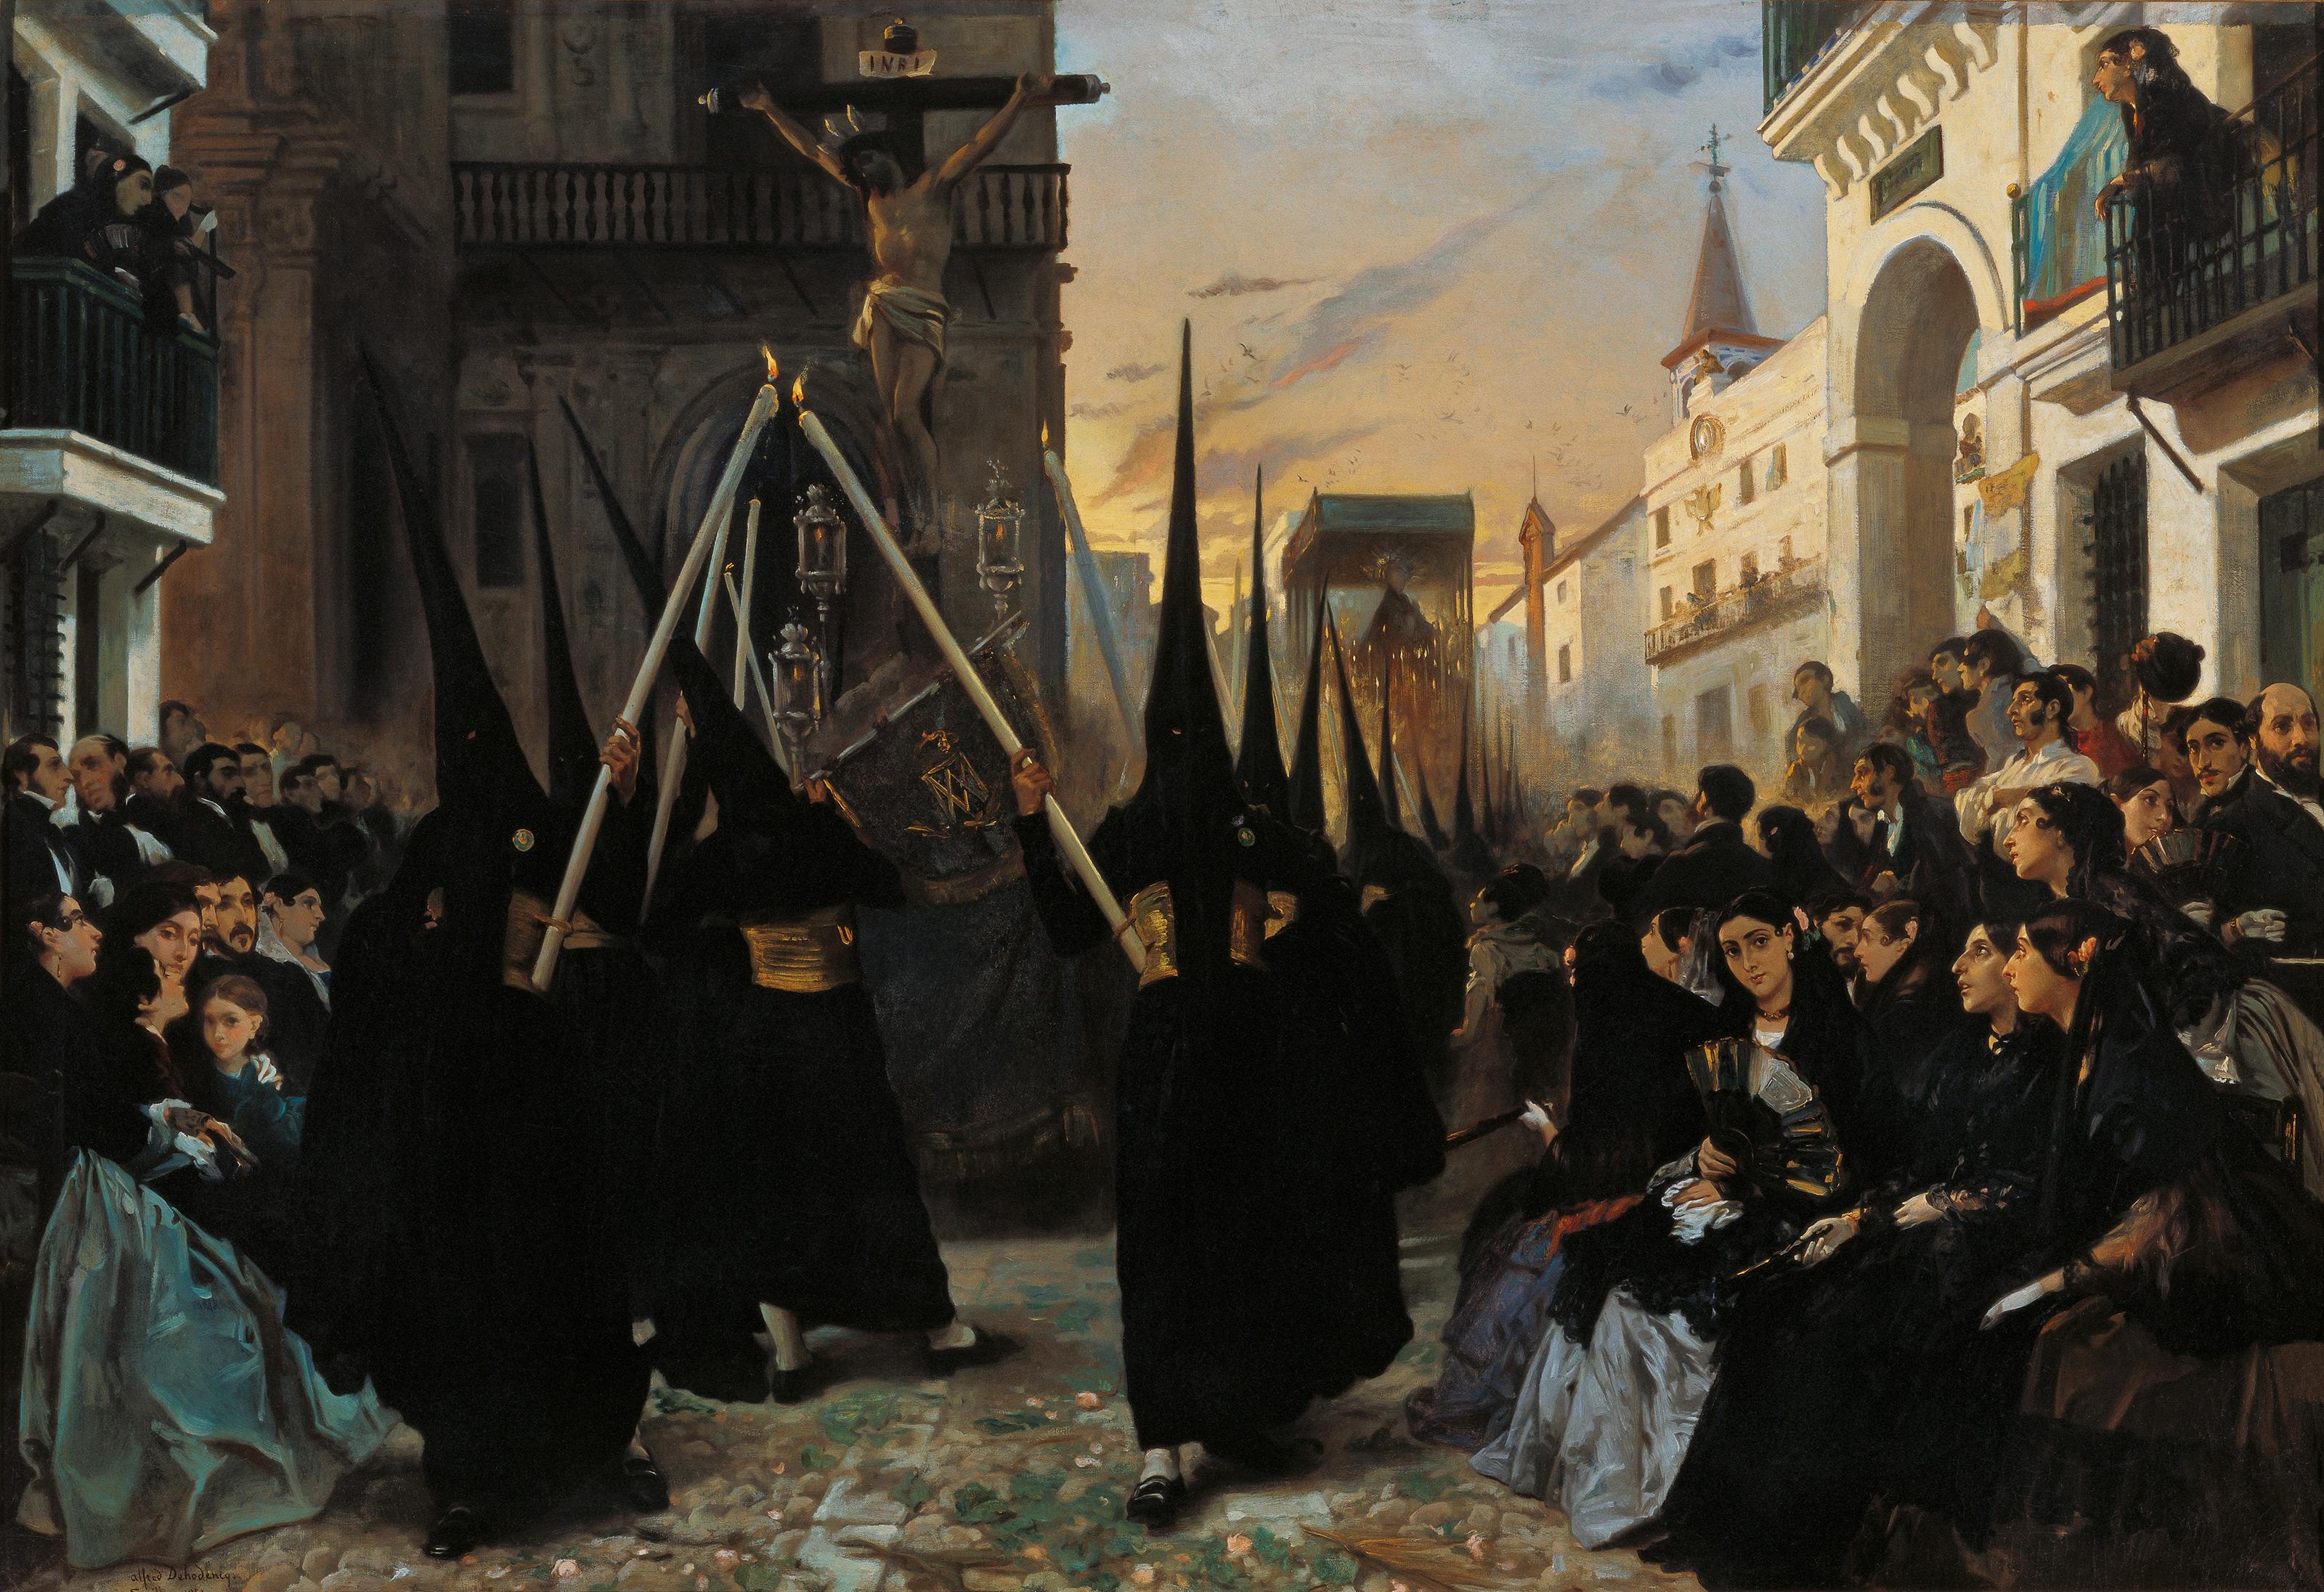 A Confraternity in Procession along Calle Génova,